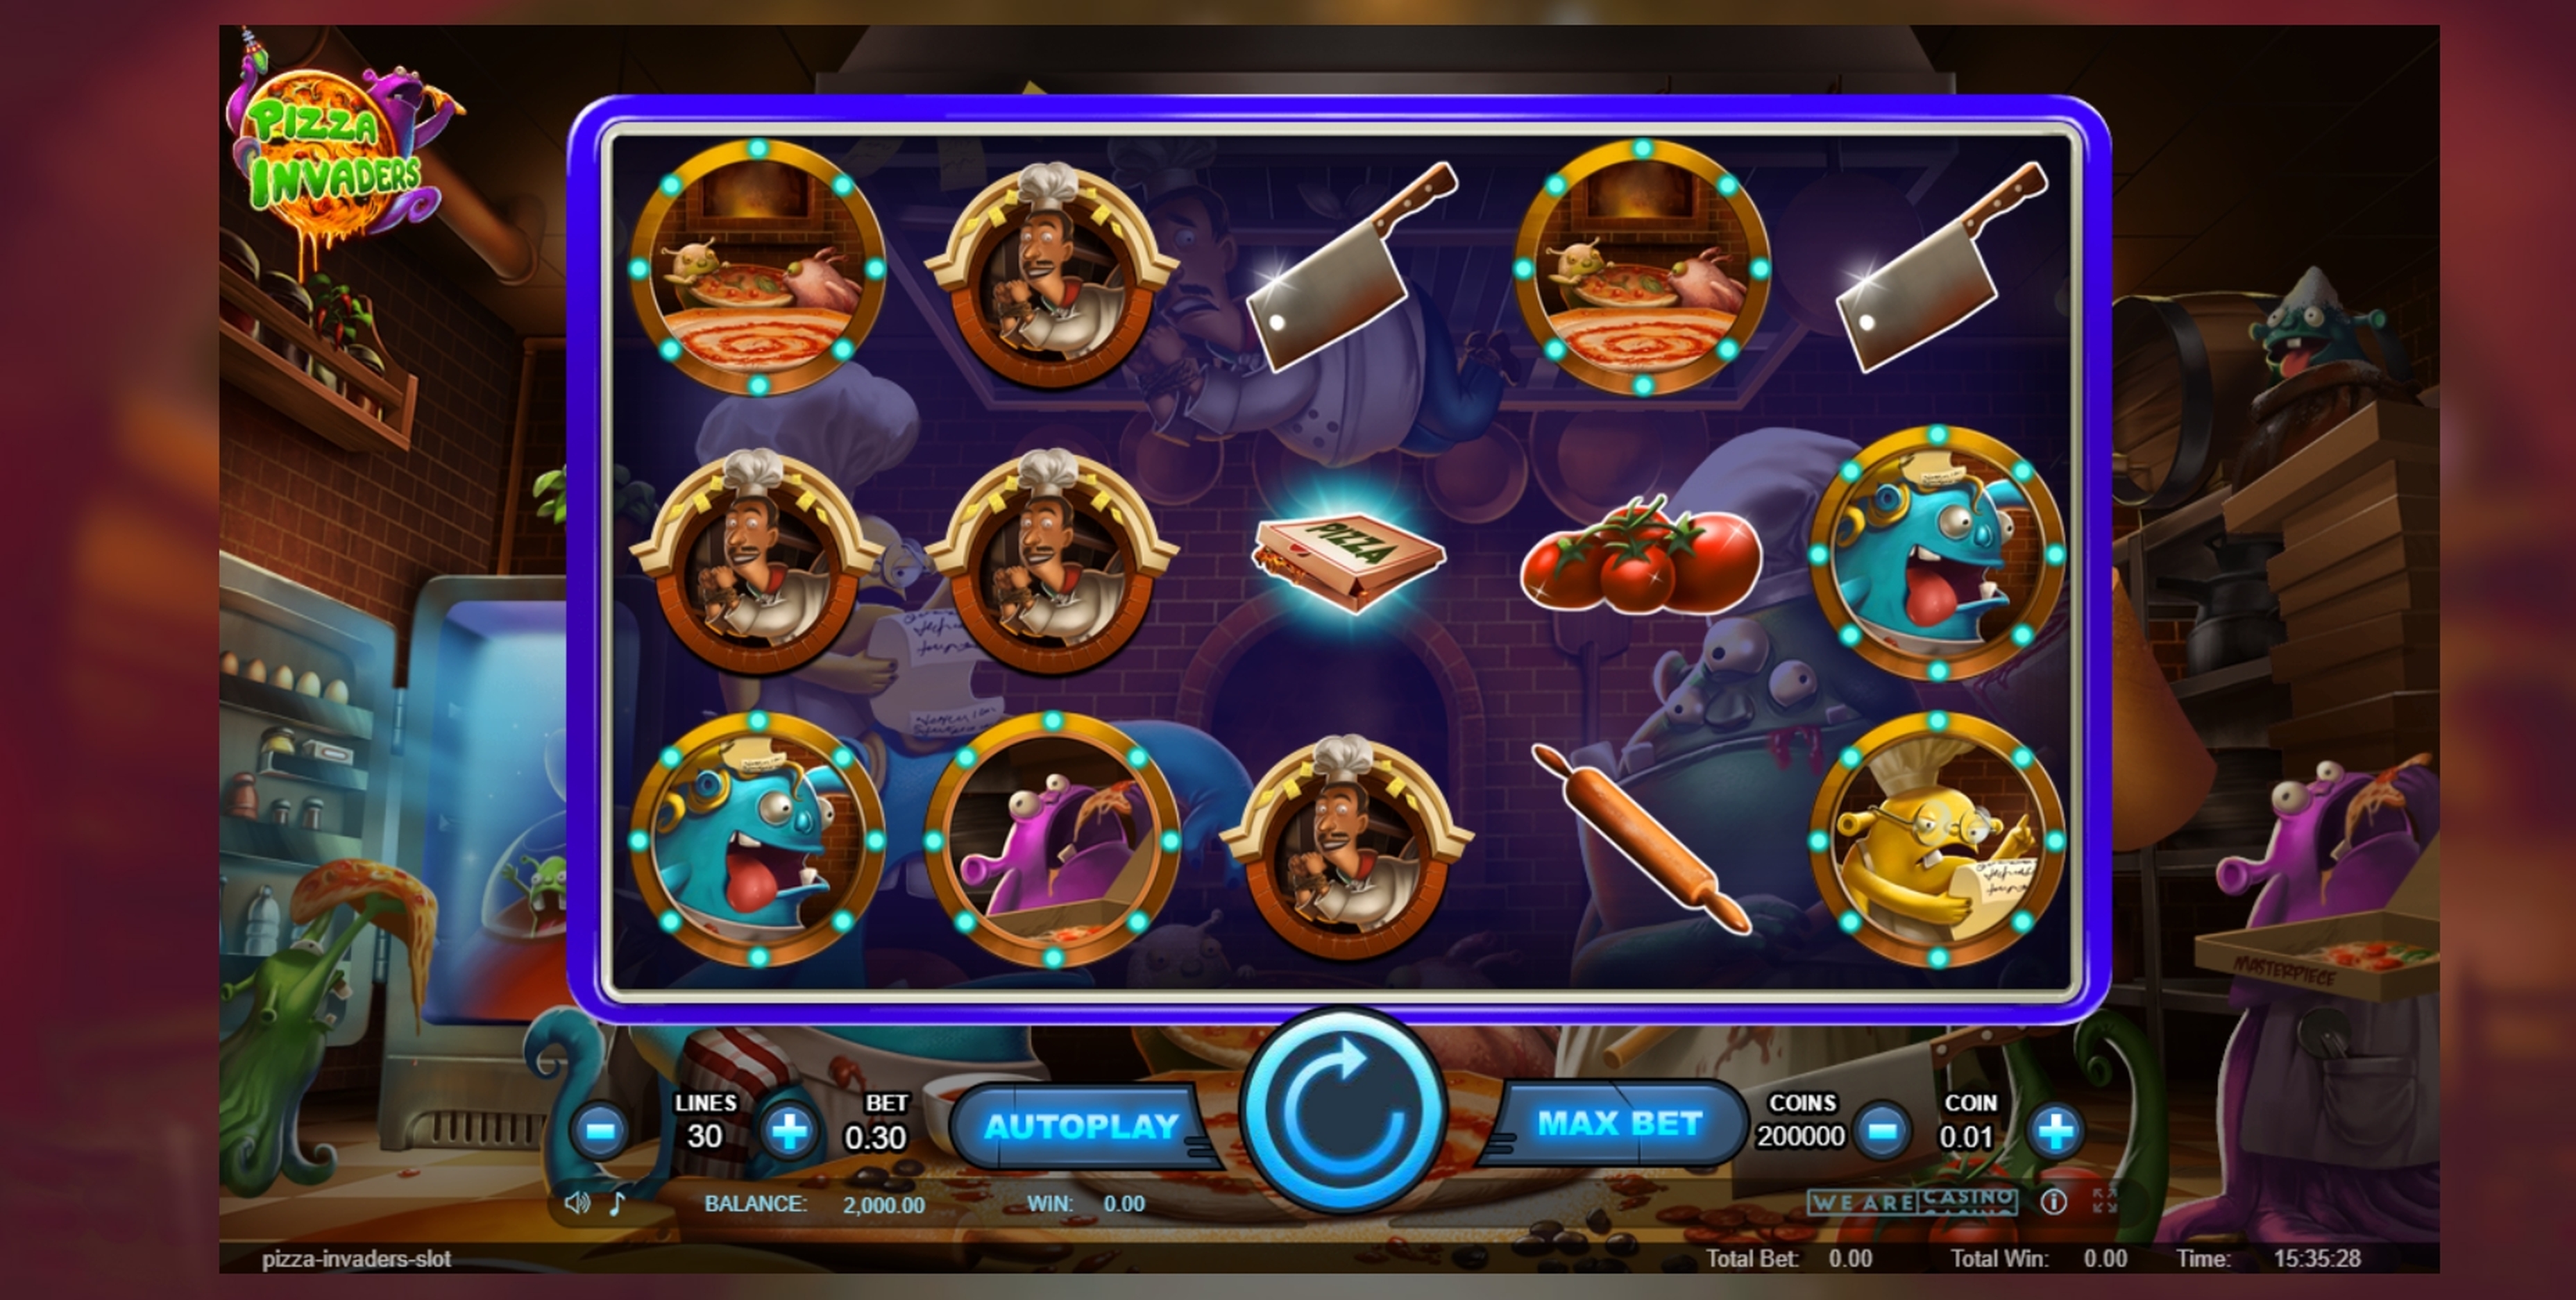 Reels in Pizza Invaders Slot Game by We Are Casino